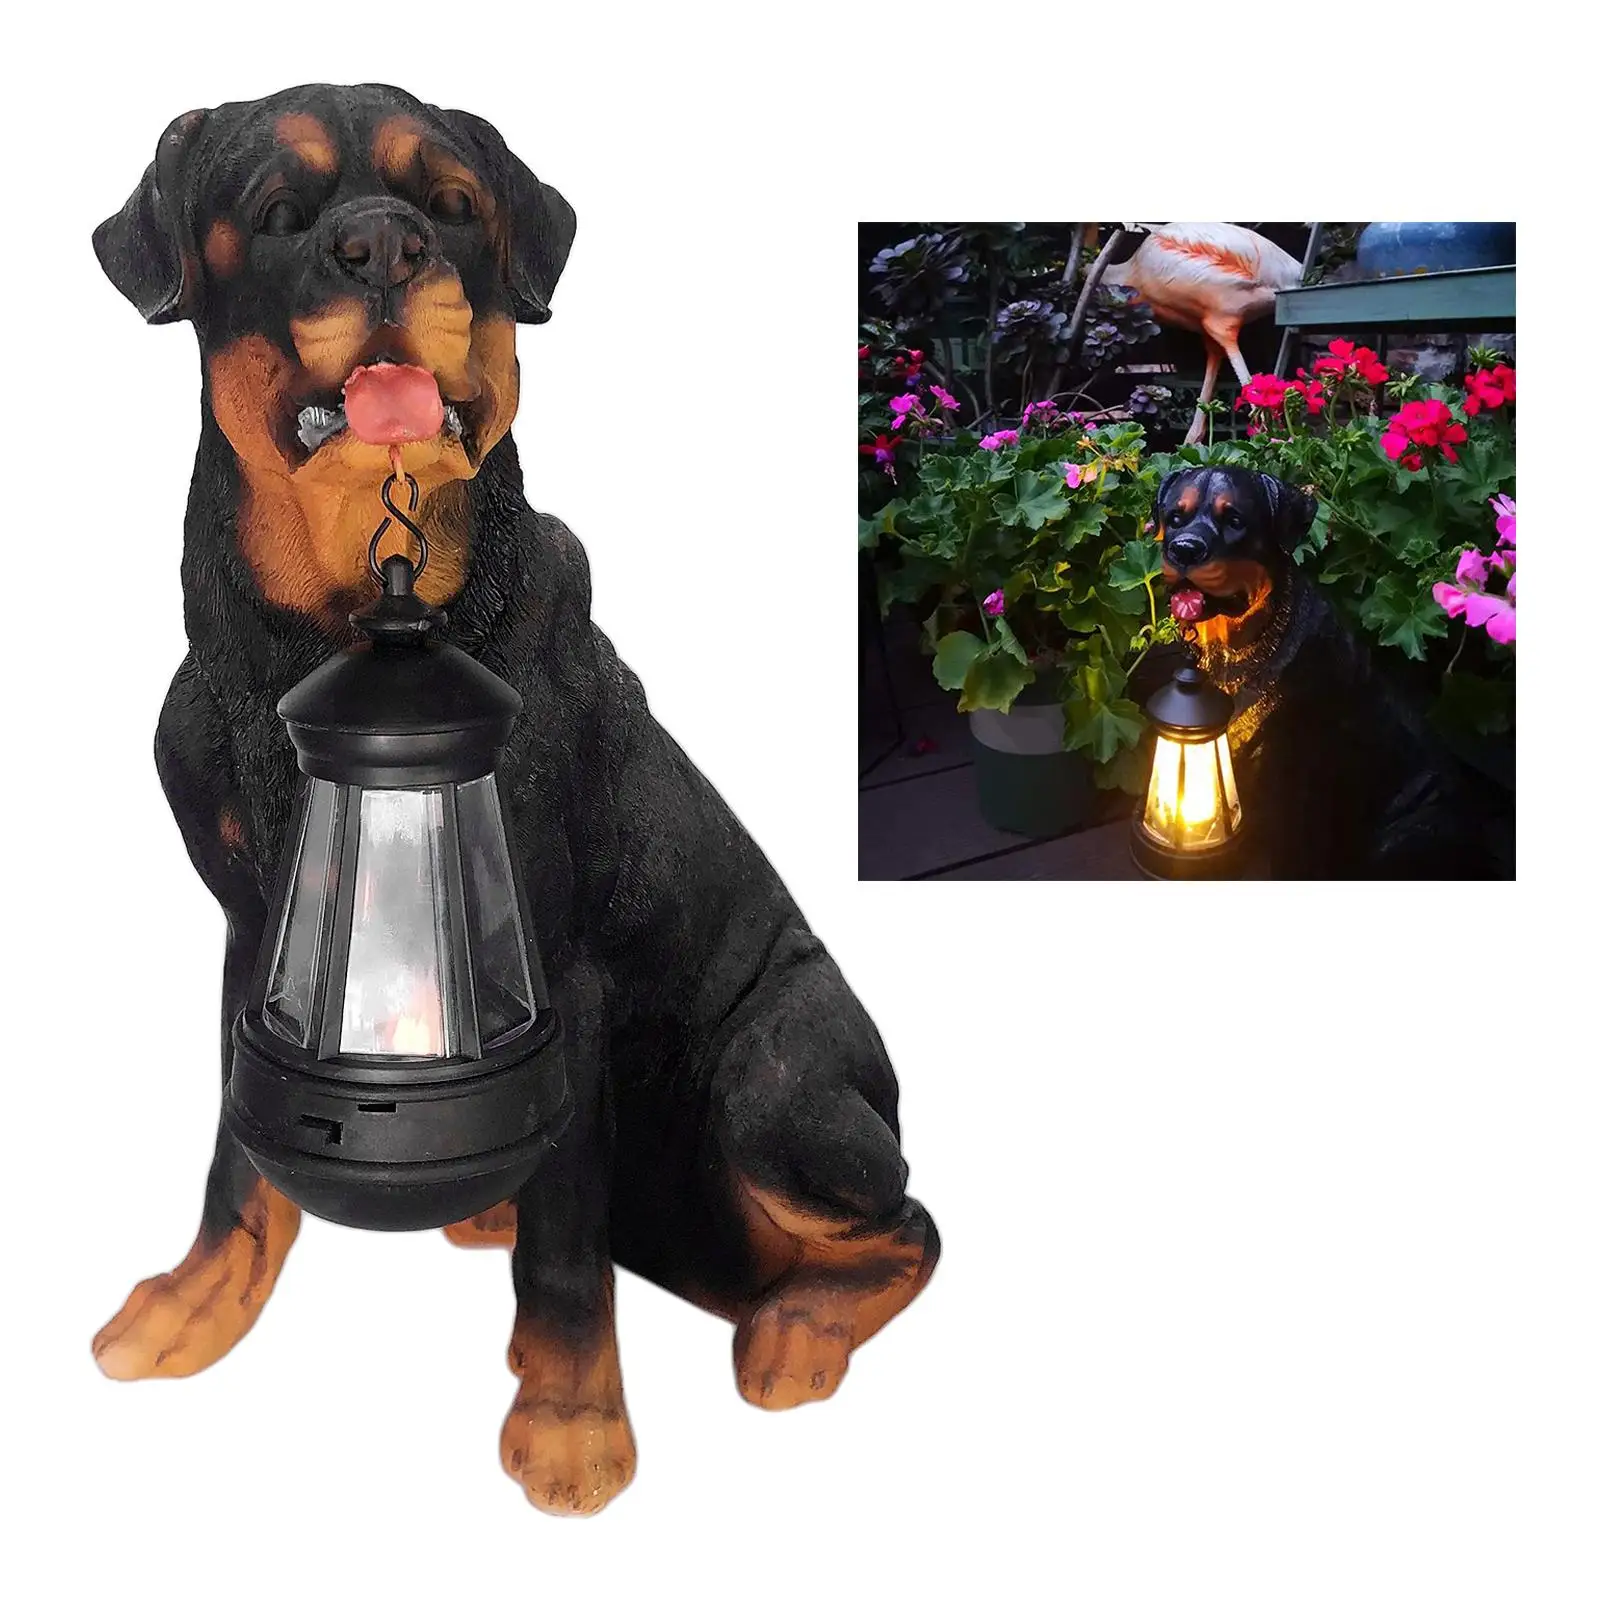 Outdoor dog  Ornament with, Golden Retriever / Labrador / Rottweiler Resin Statue with Detachable Lantern From